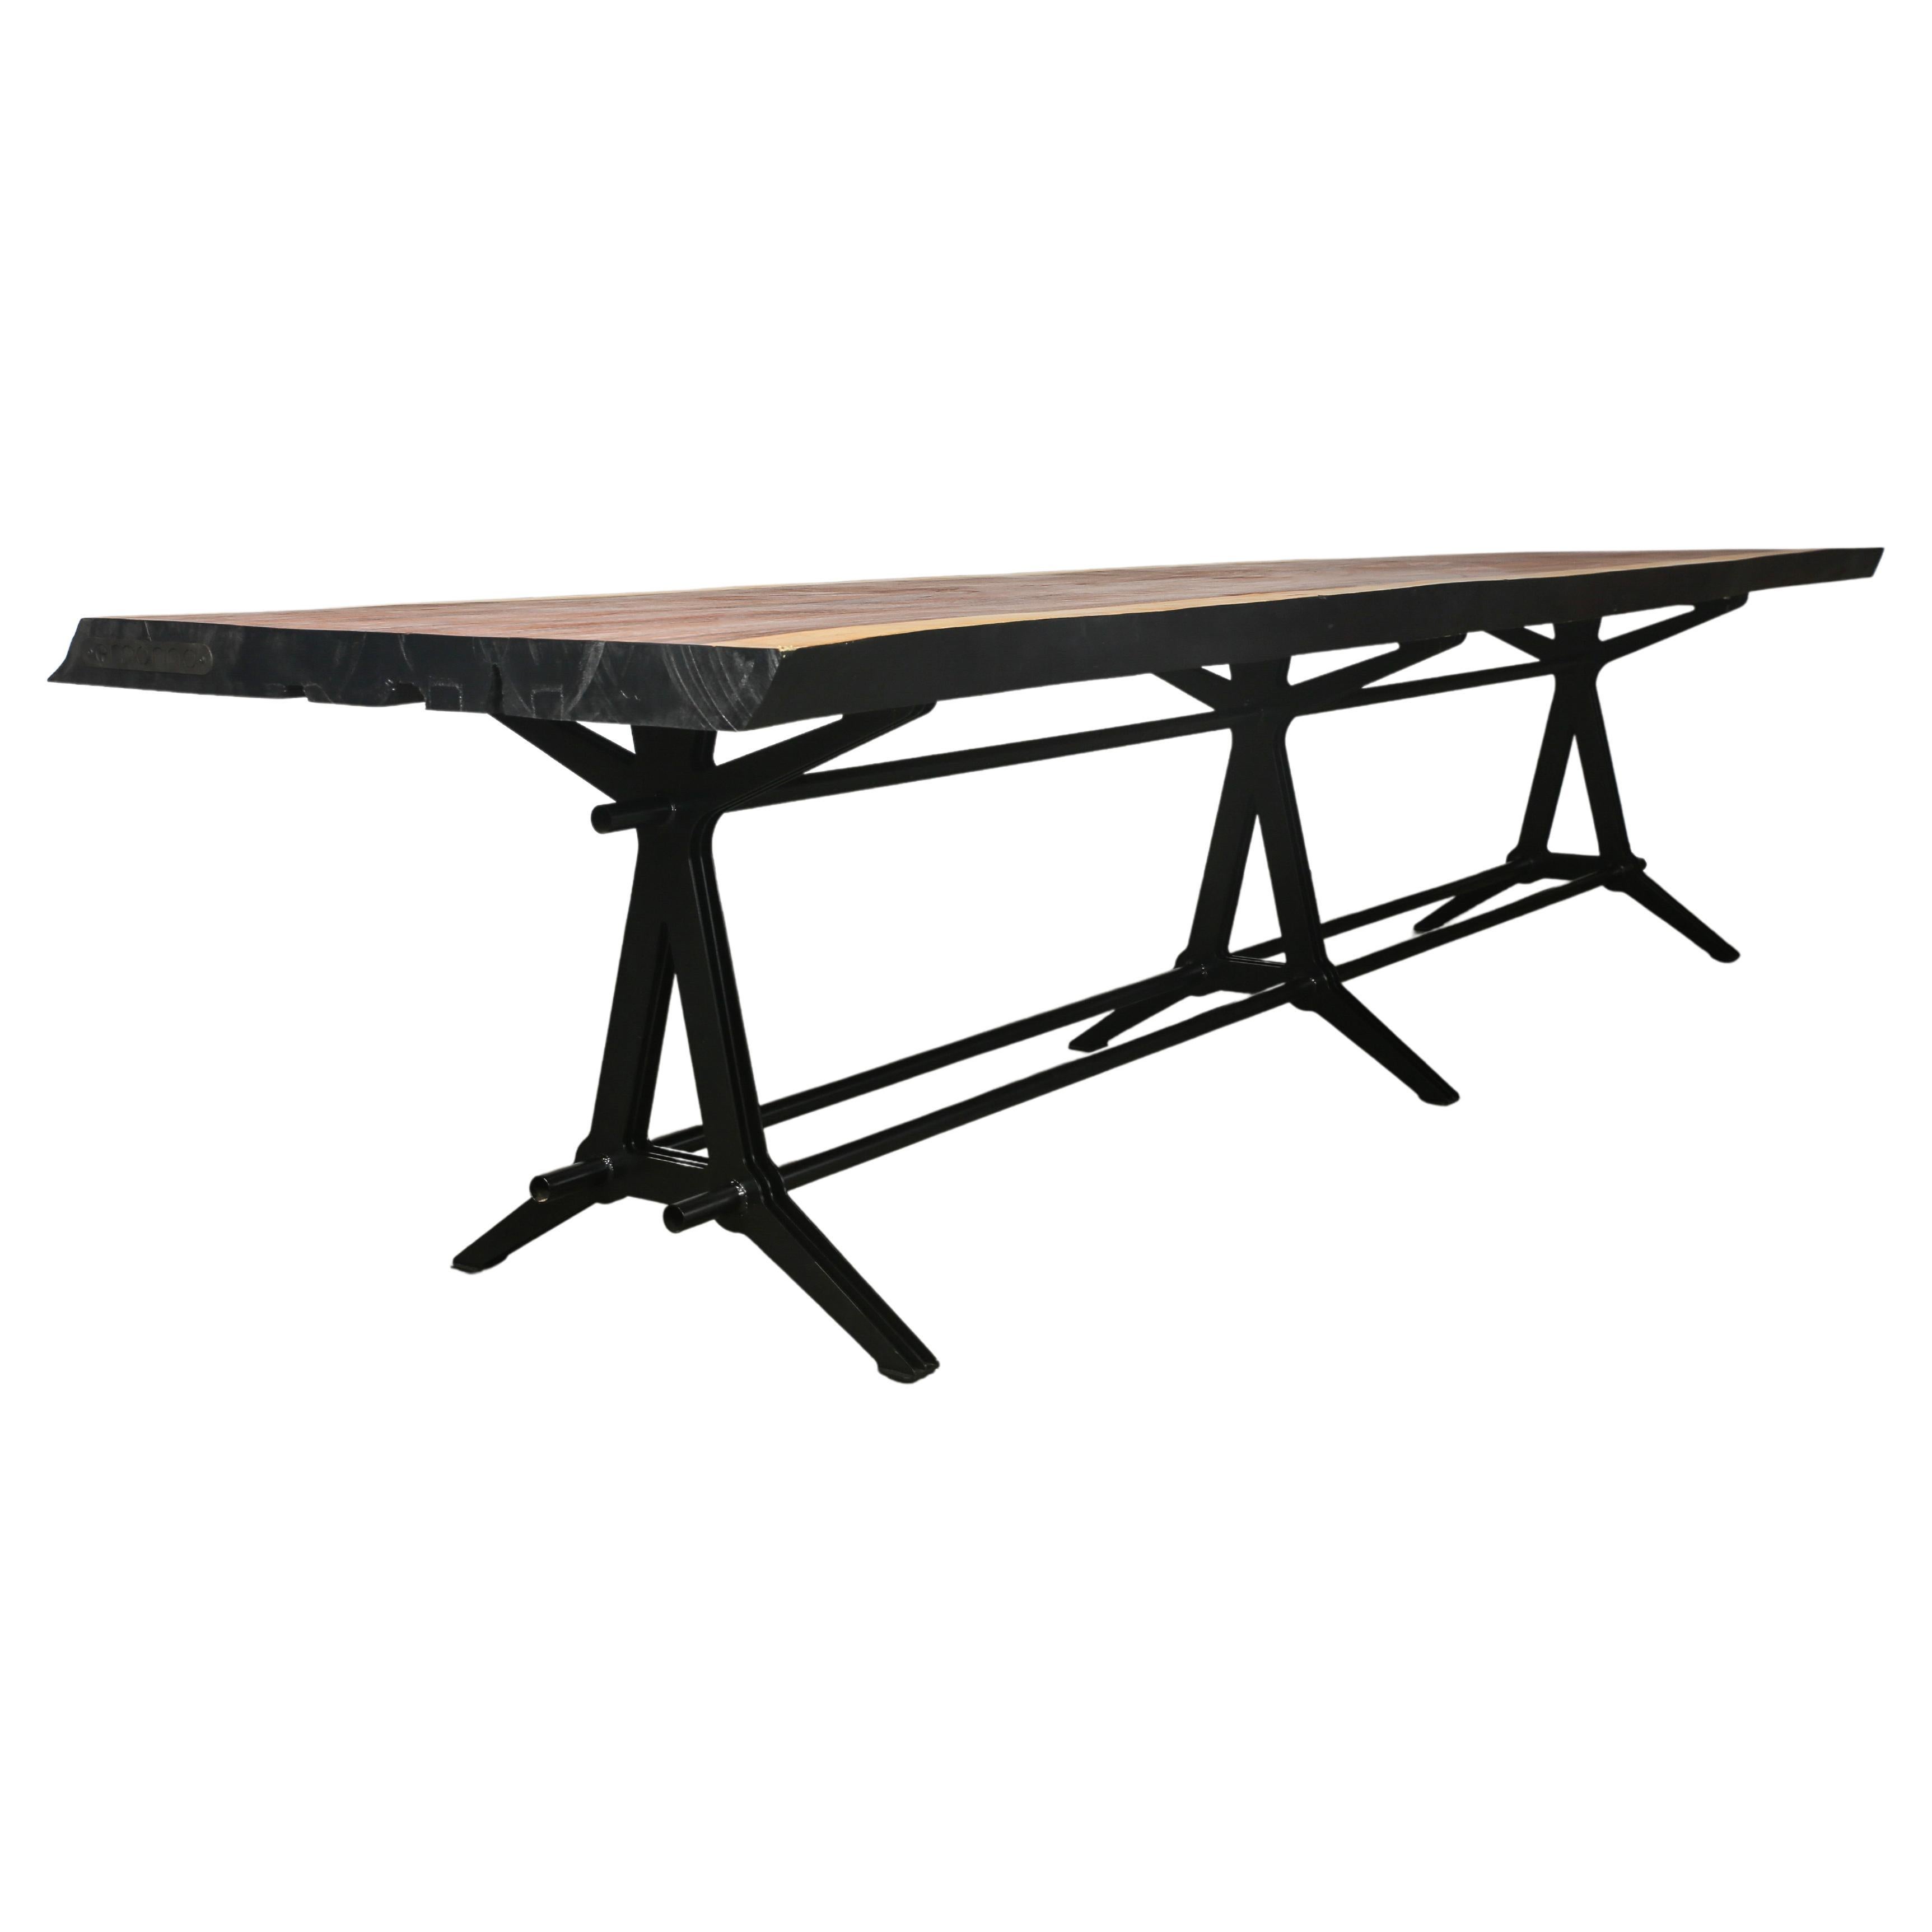 Lamellae Table with wooden top and black steel base by Manna Design Studio For Sale